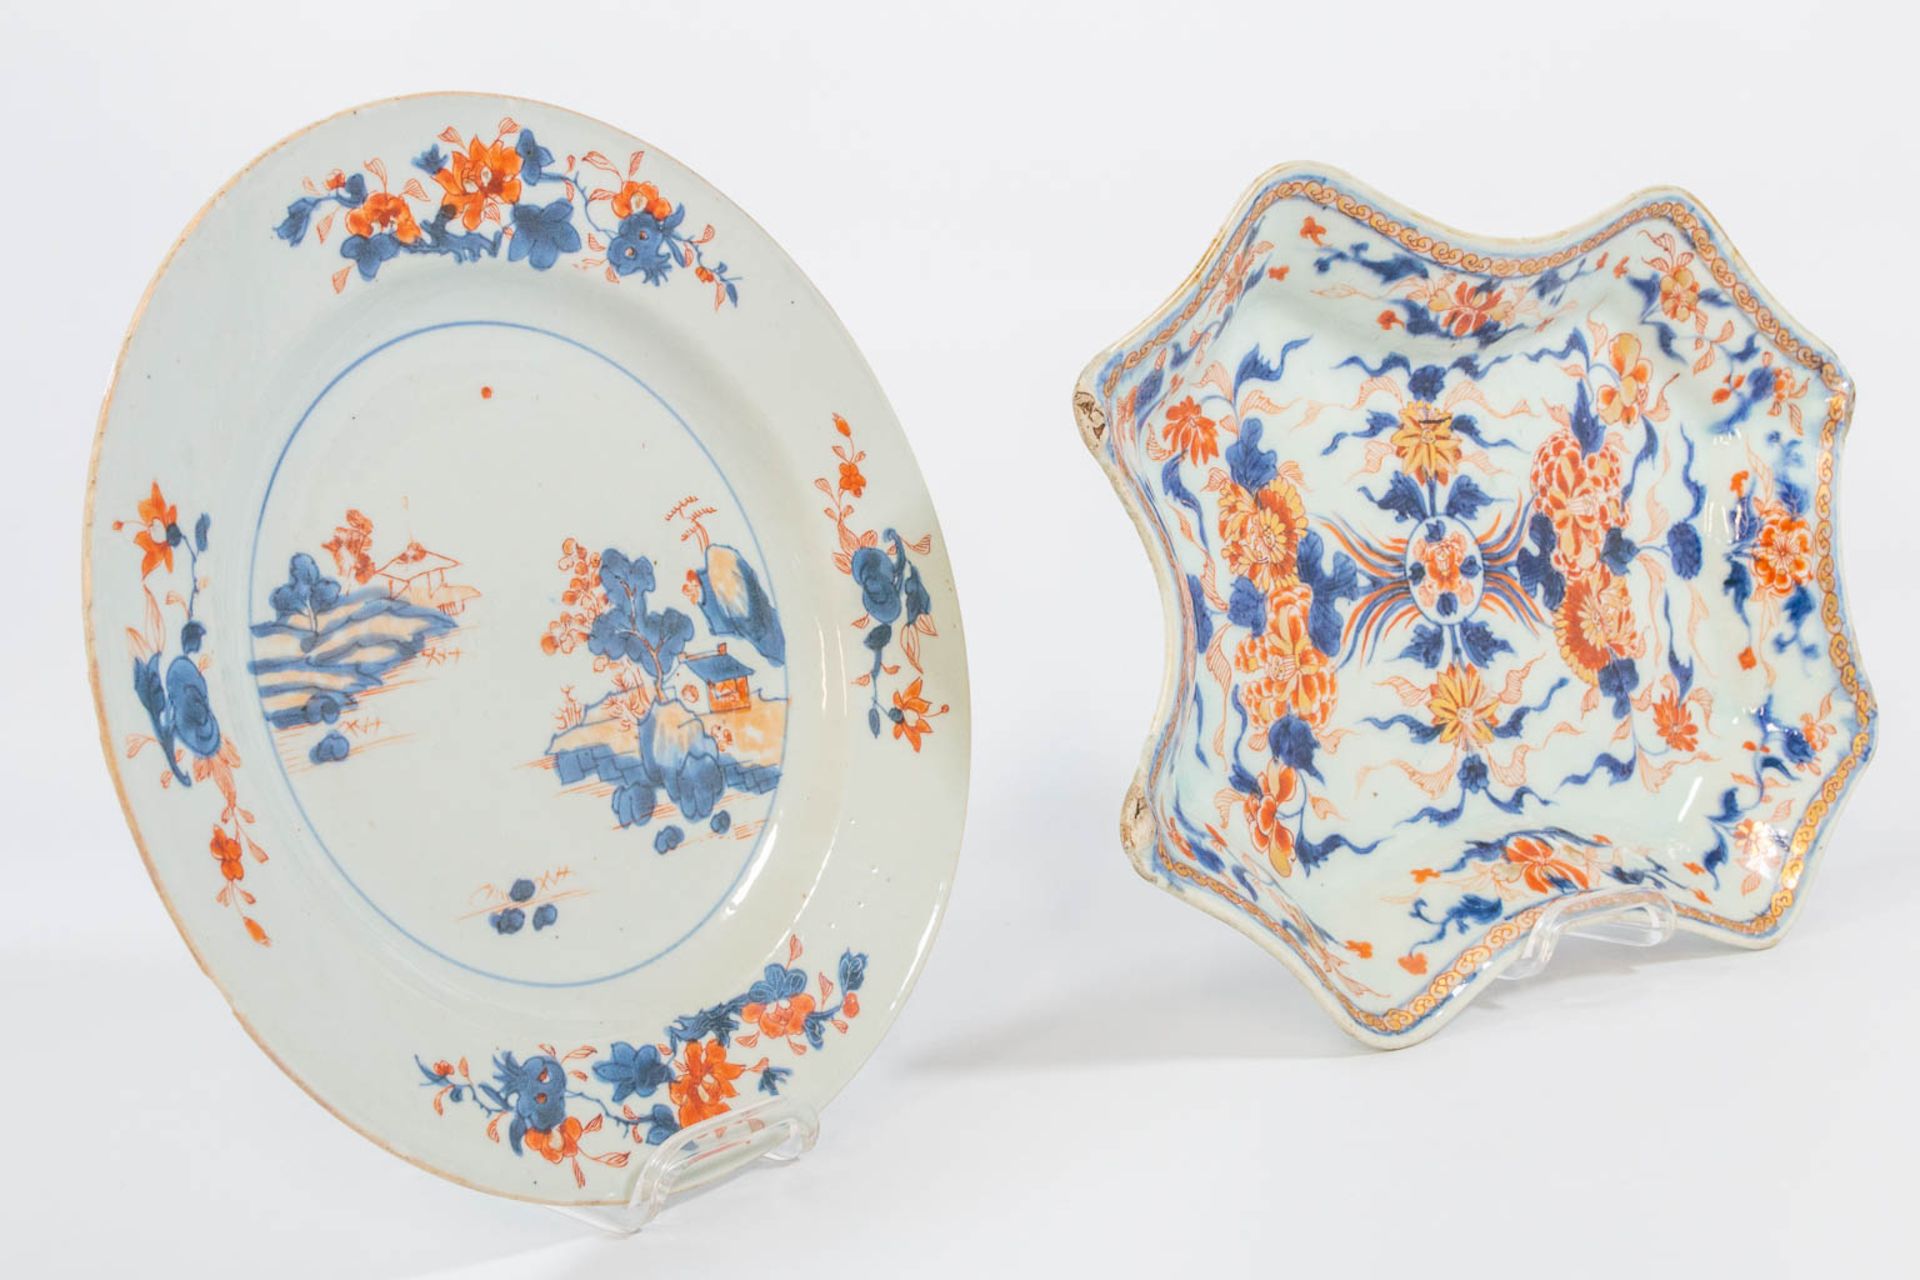 A collection of 6 famille rose objects and plates, made of porcelain. - Image 15 of 24